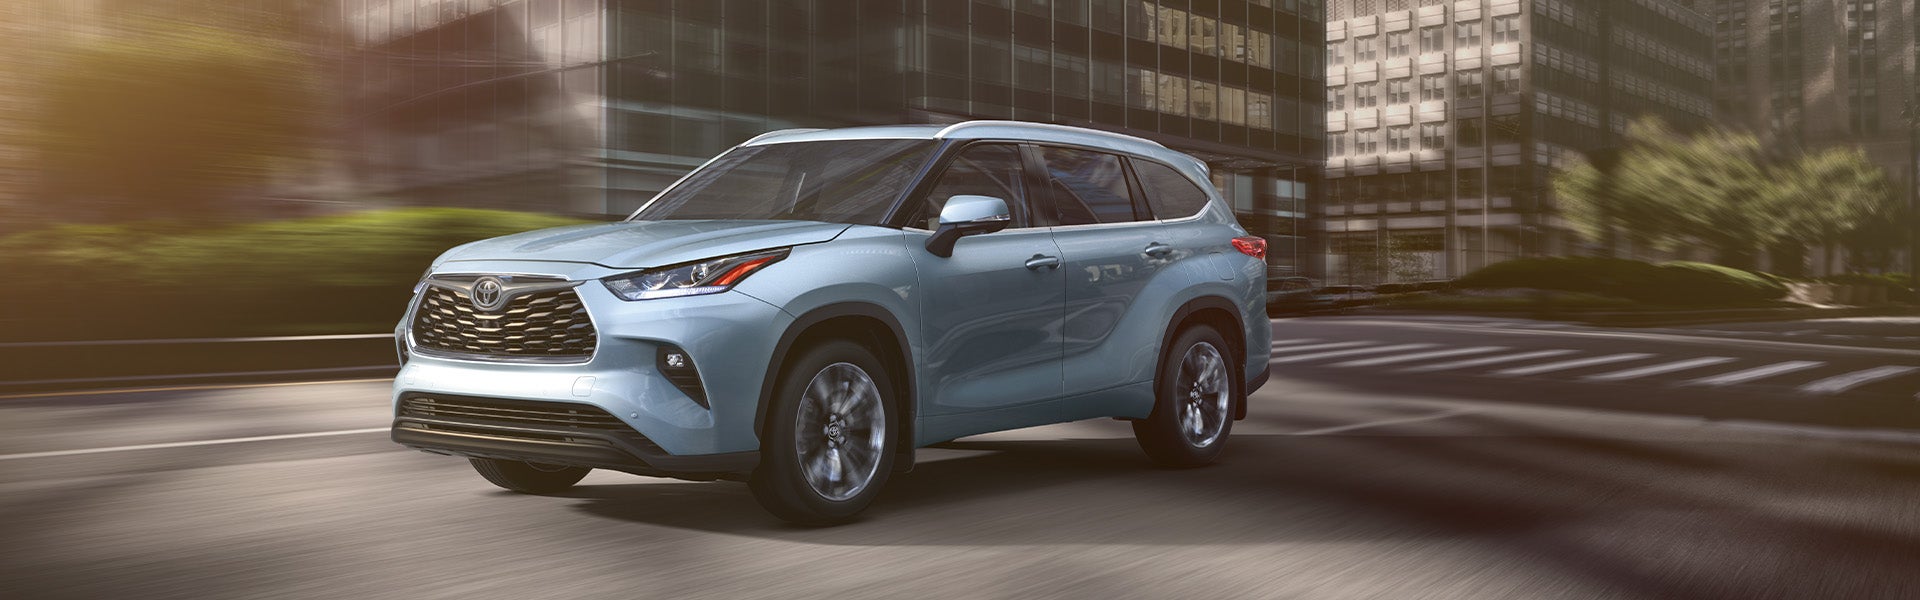 Model Features of the 2021 Toyota Highlander at Bennett Toyota | Blue 2021 Toyota Highlander Driving Through City